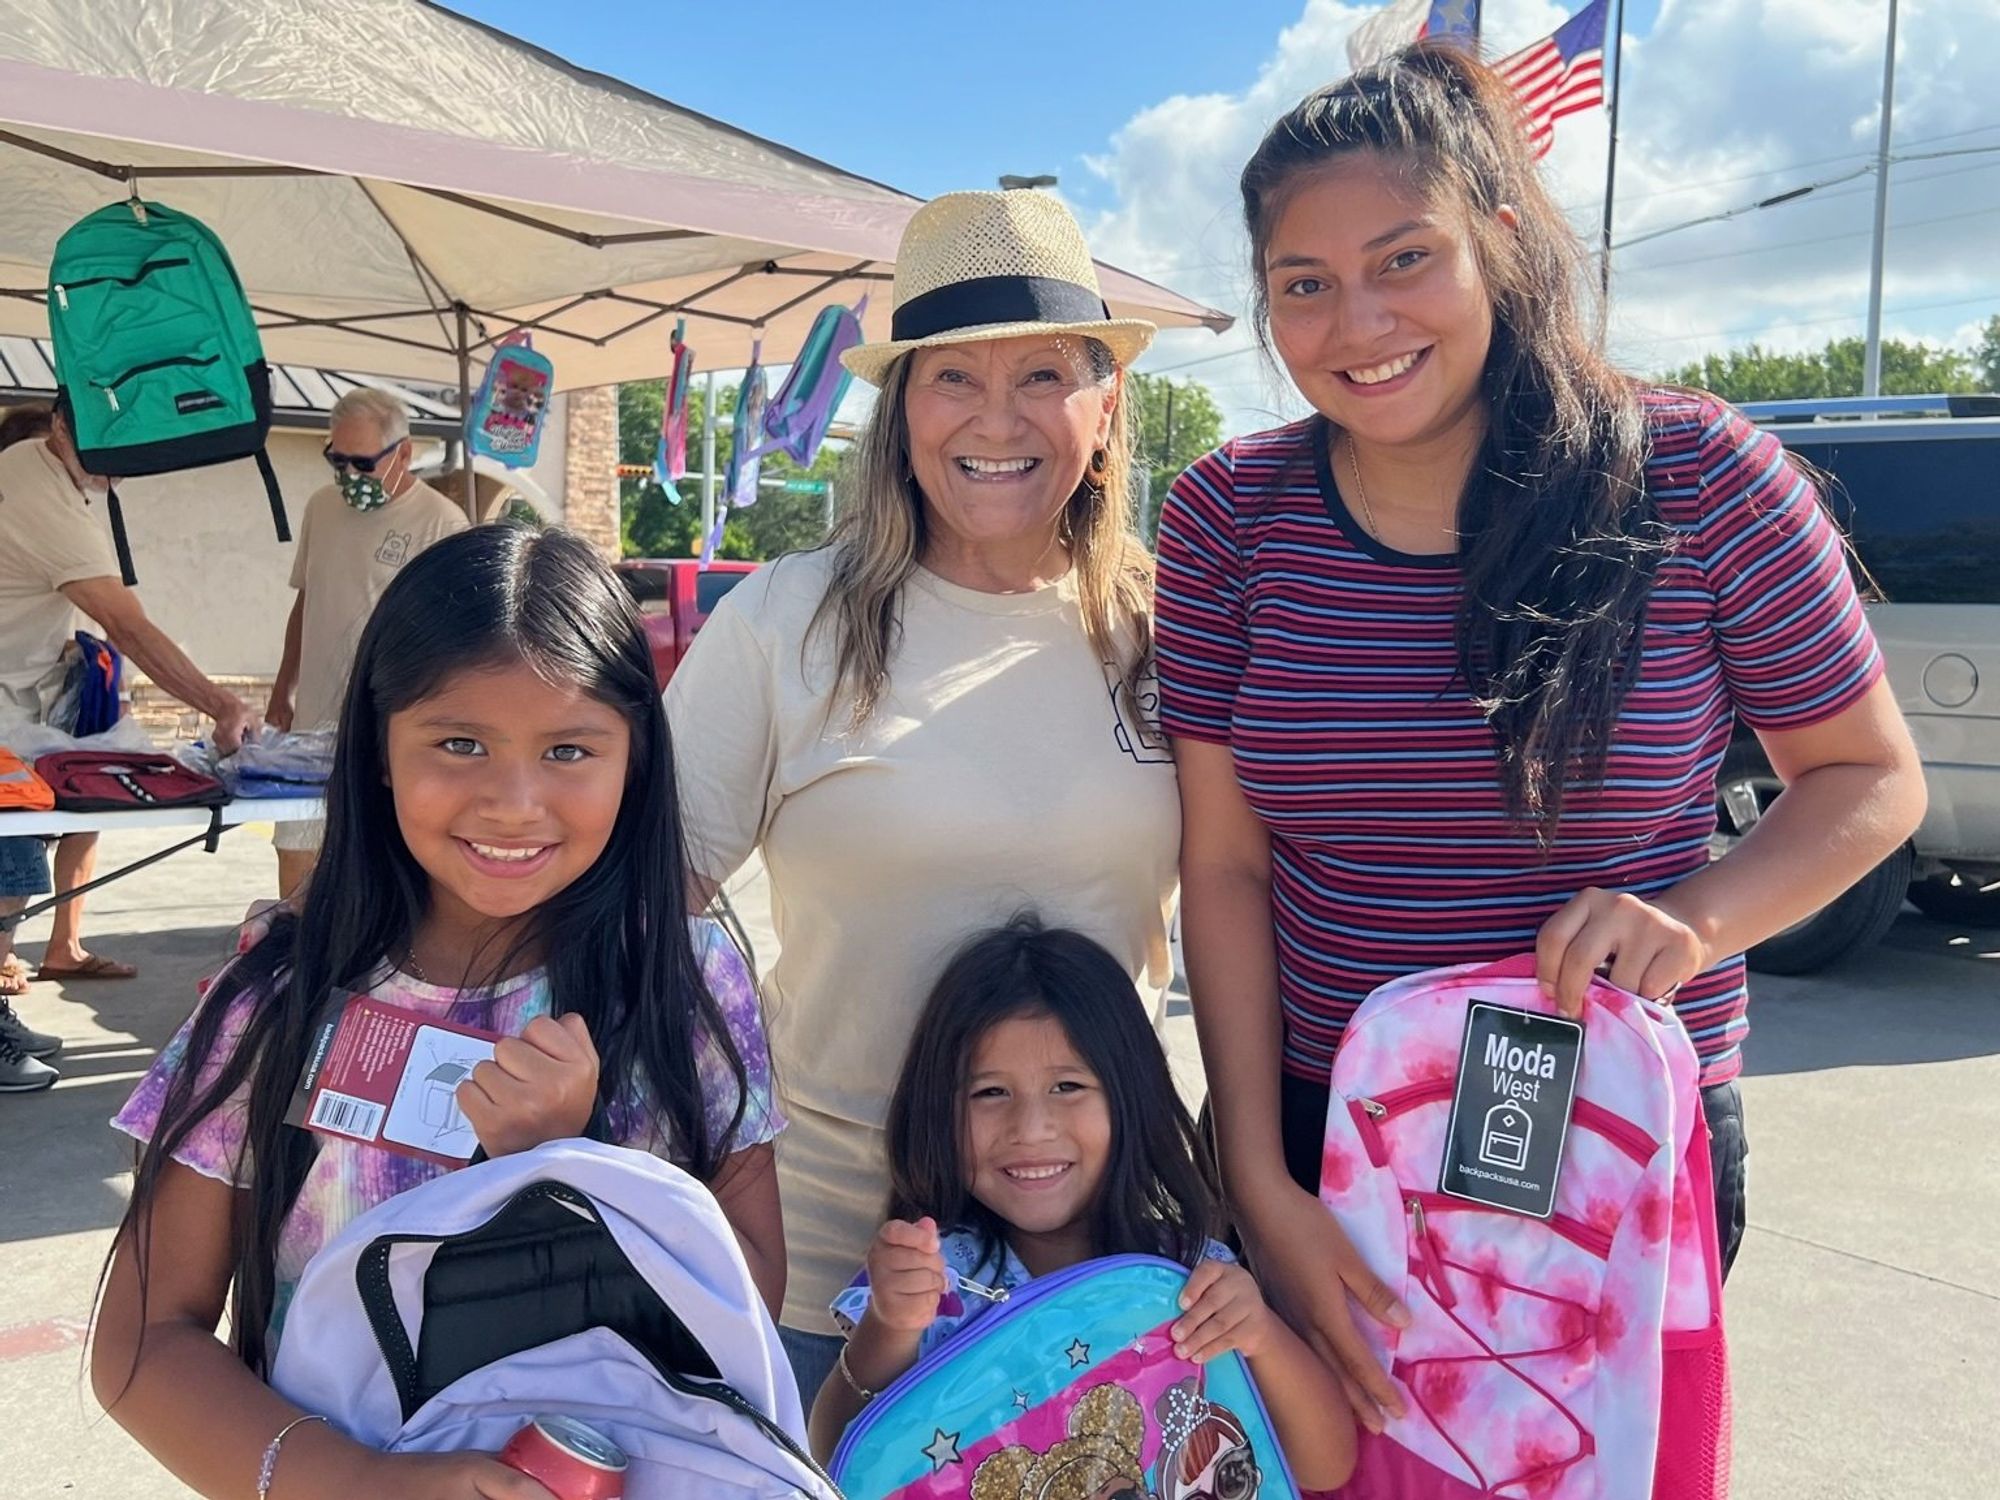 Connie S. Amaya and students with backpacks